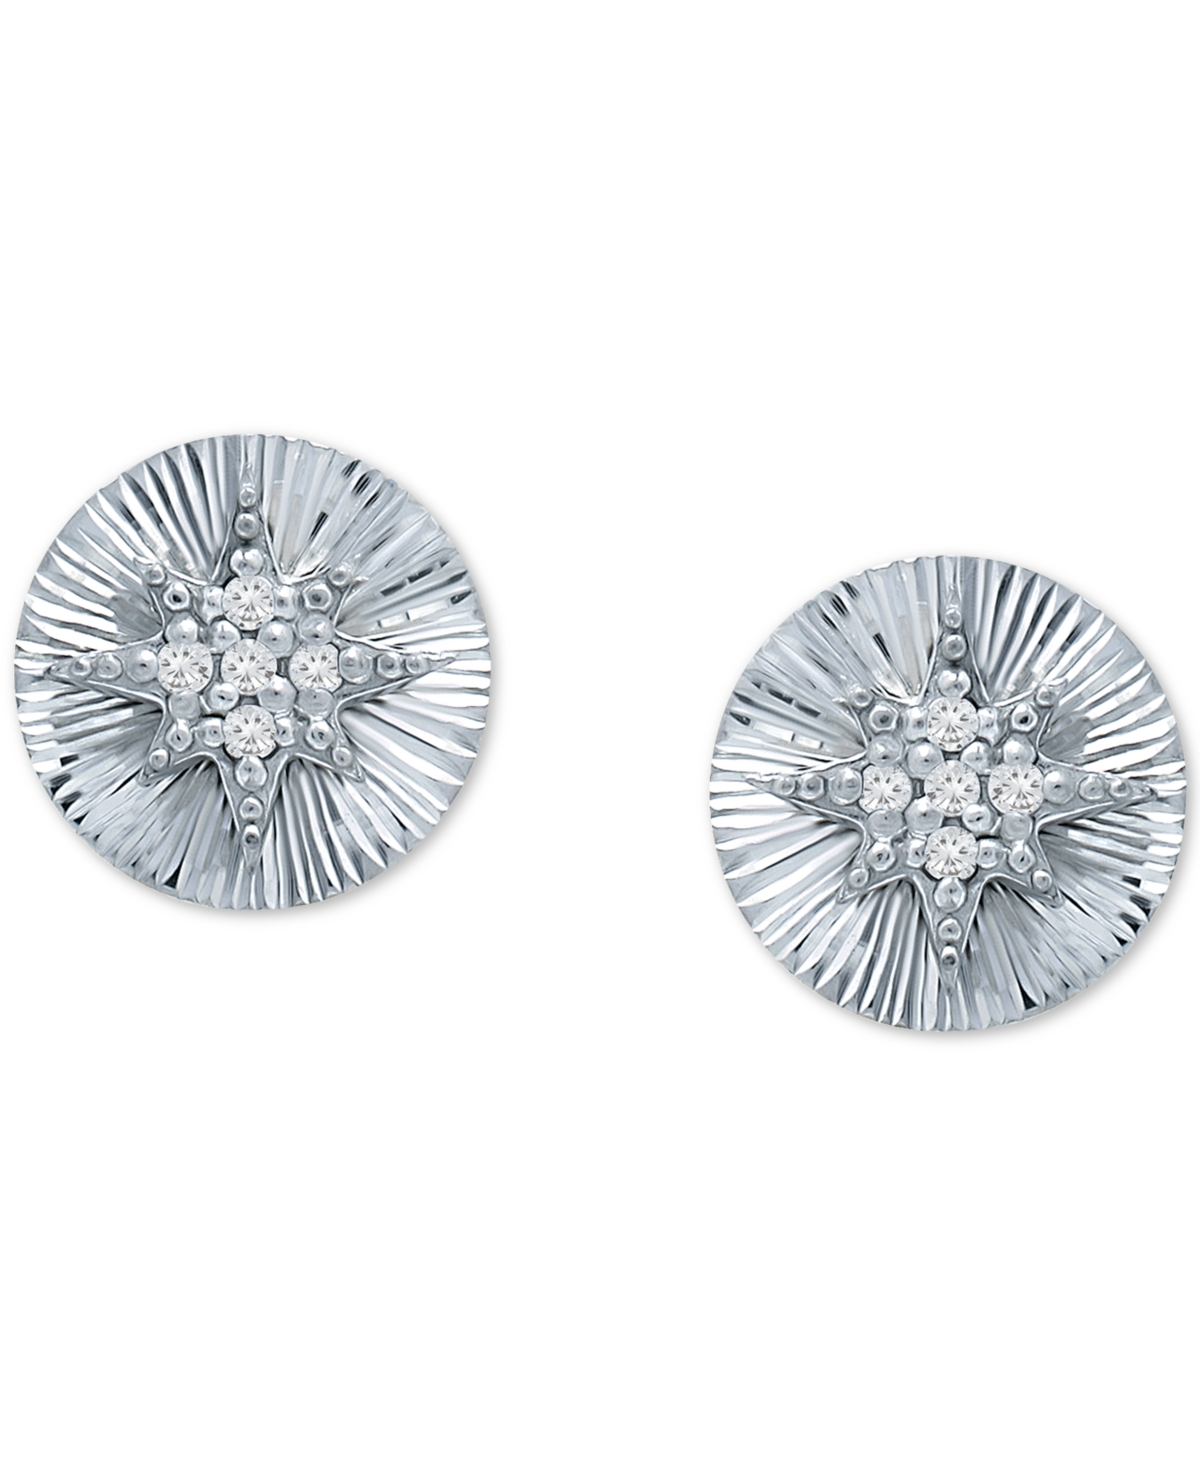 Cubic Zirconia Starburst Disc Stud Earrings, Created for Macy's - Gold over Silver